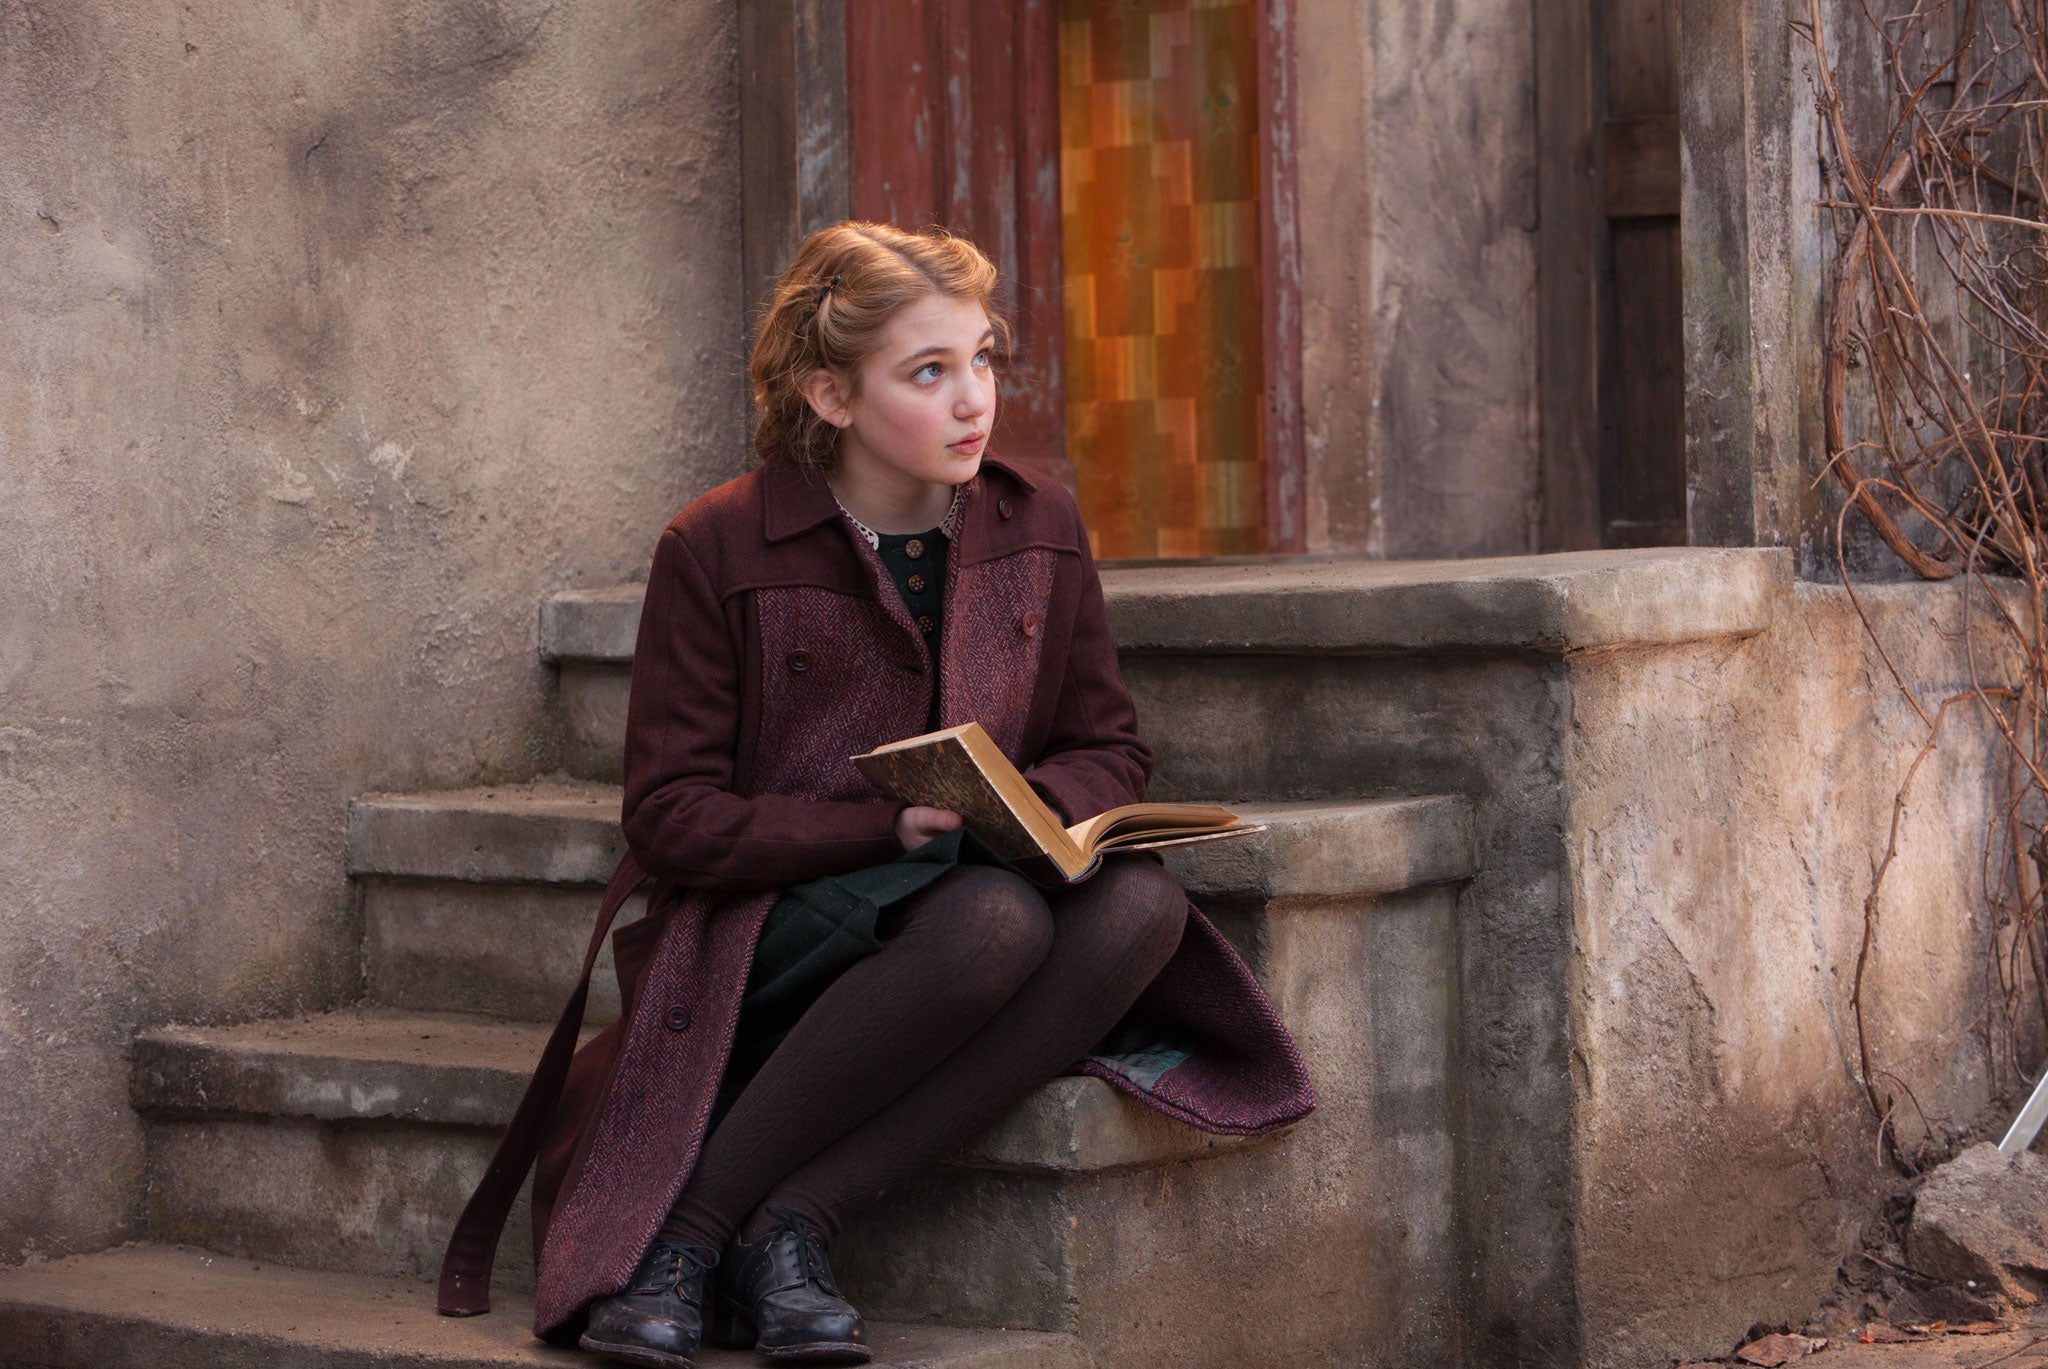 Film adaptation of 'The Book Thief'